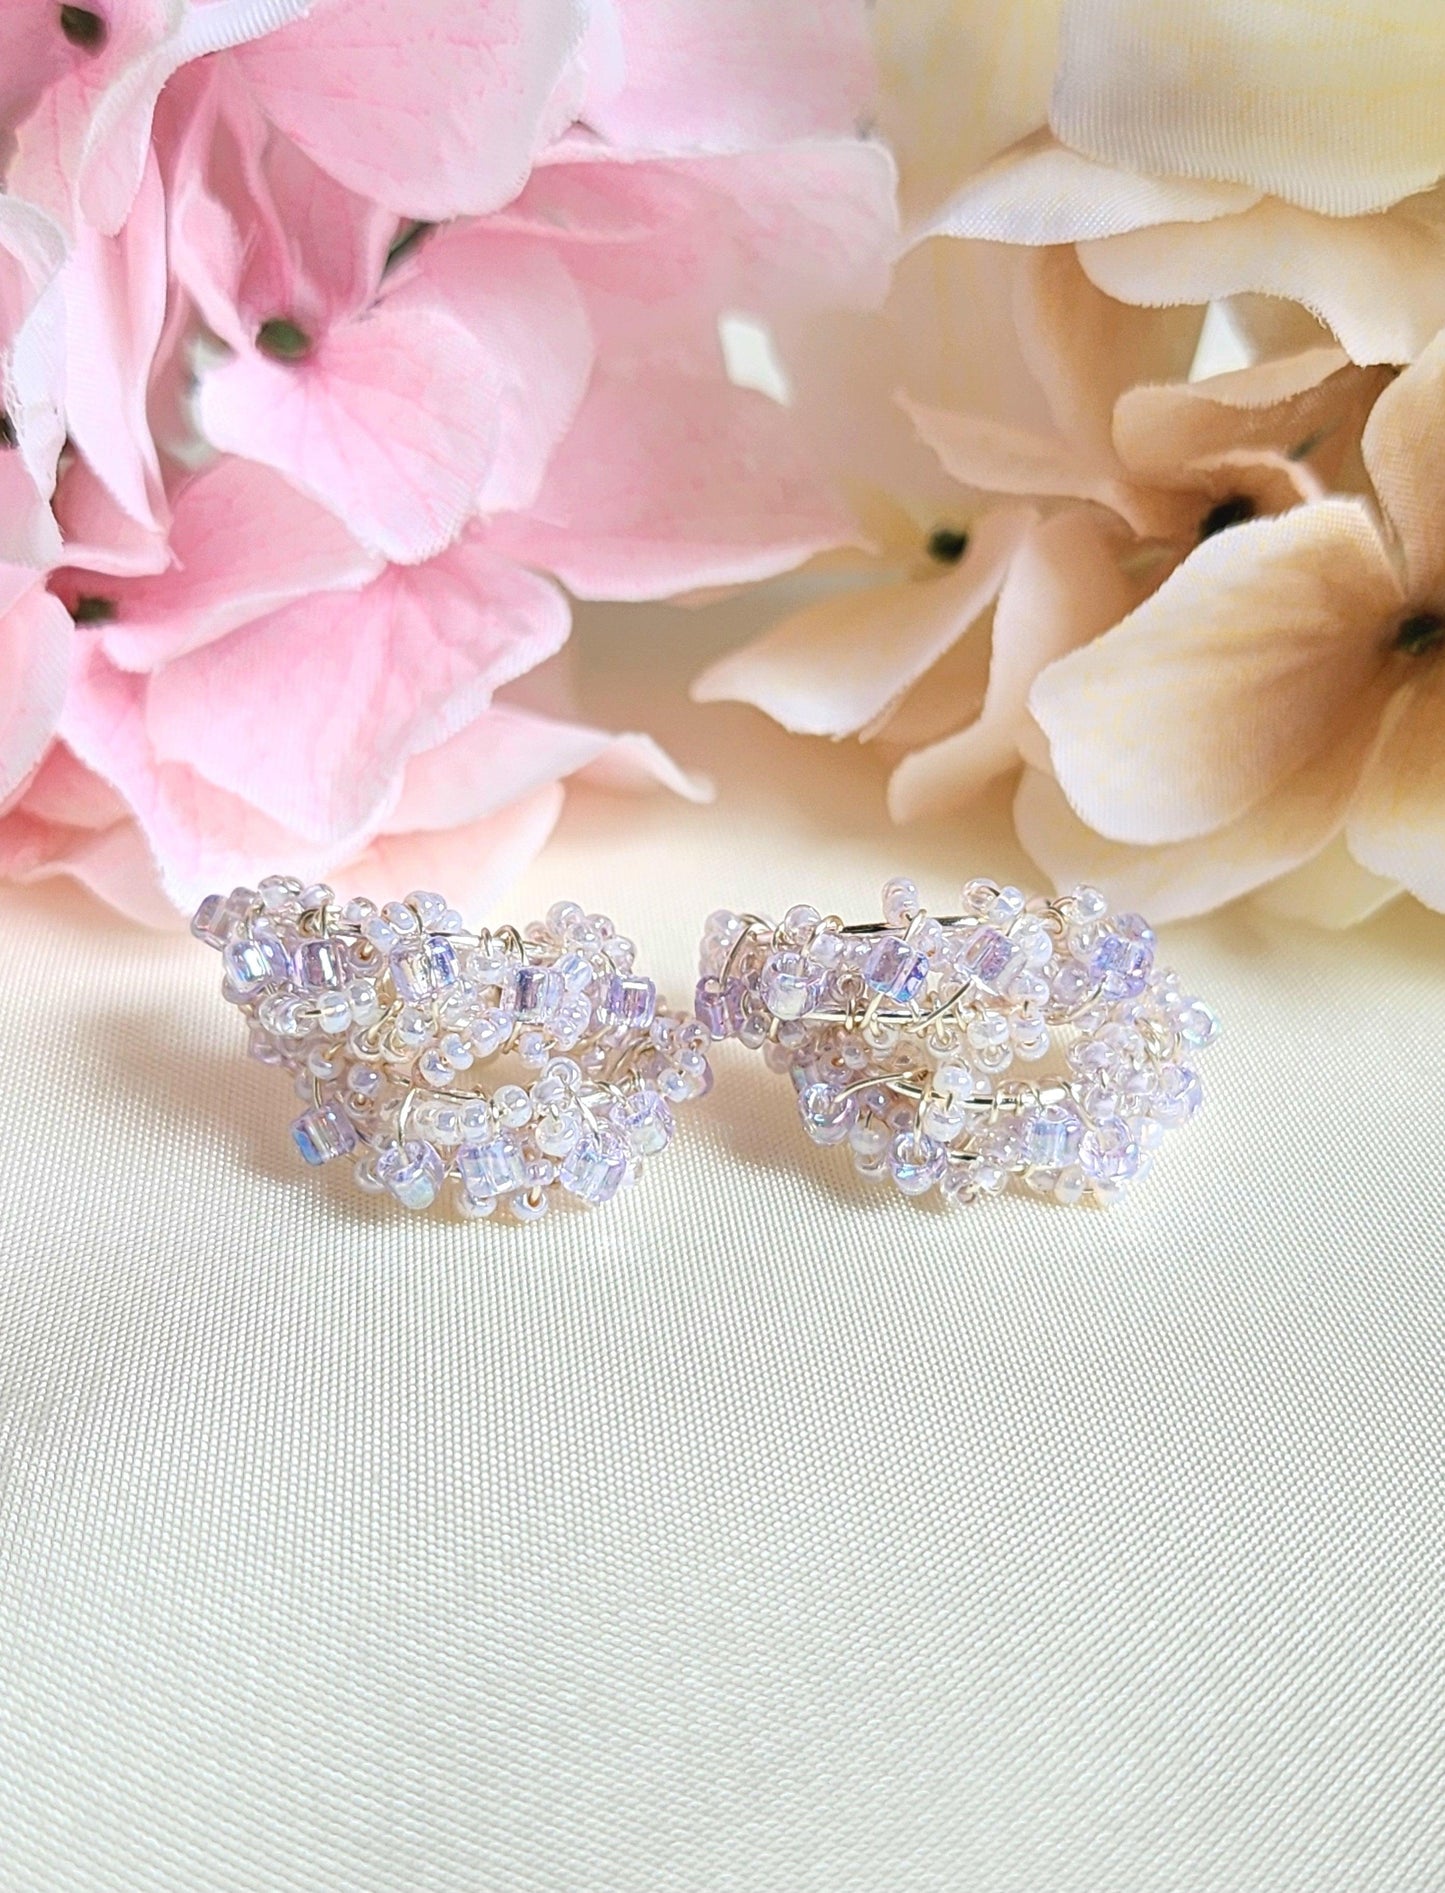 Corsage Earcuffs - By Cocoyu